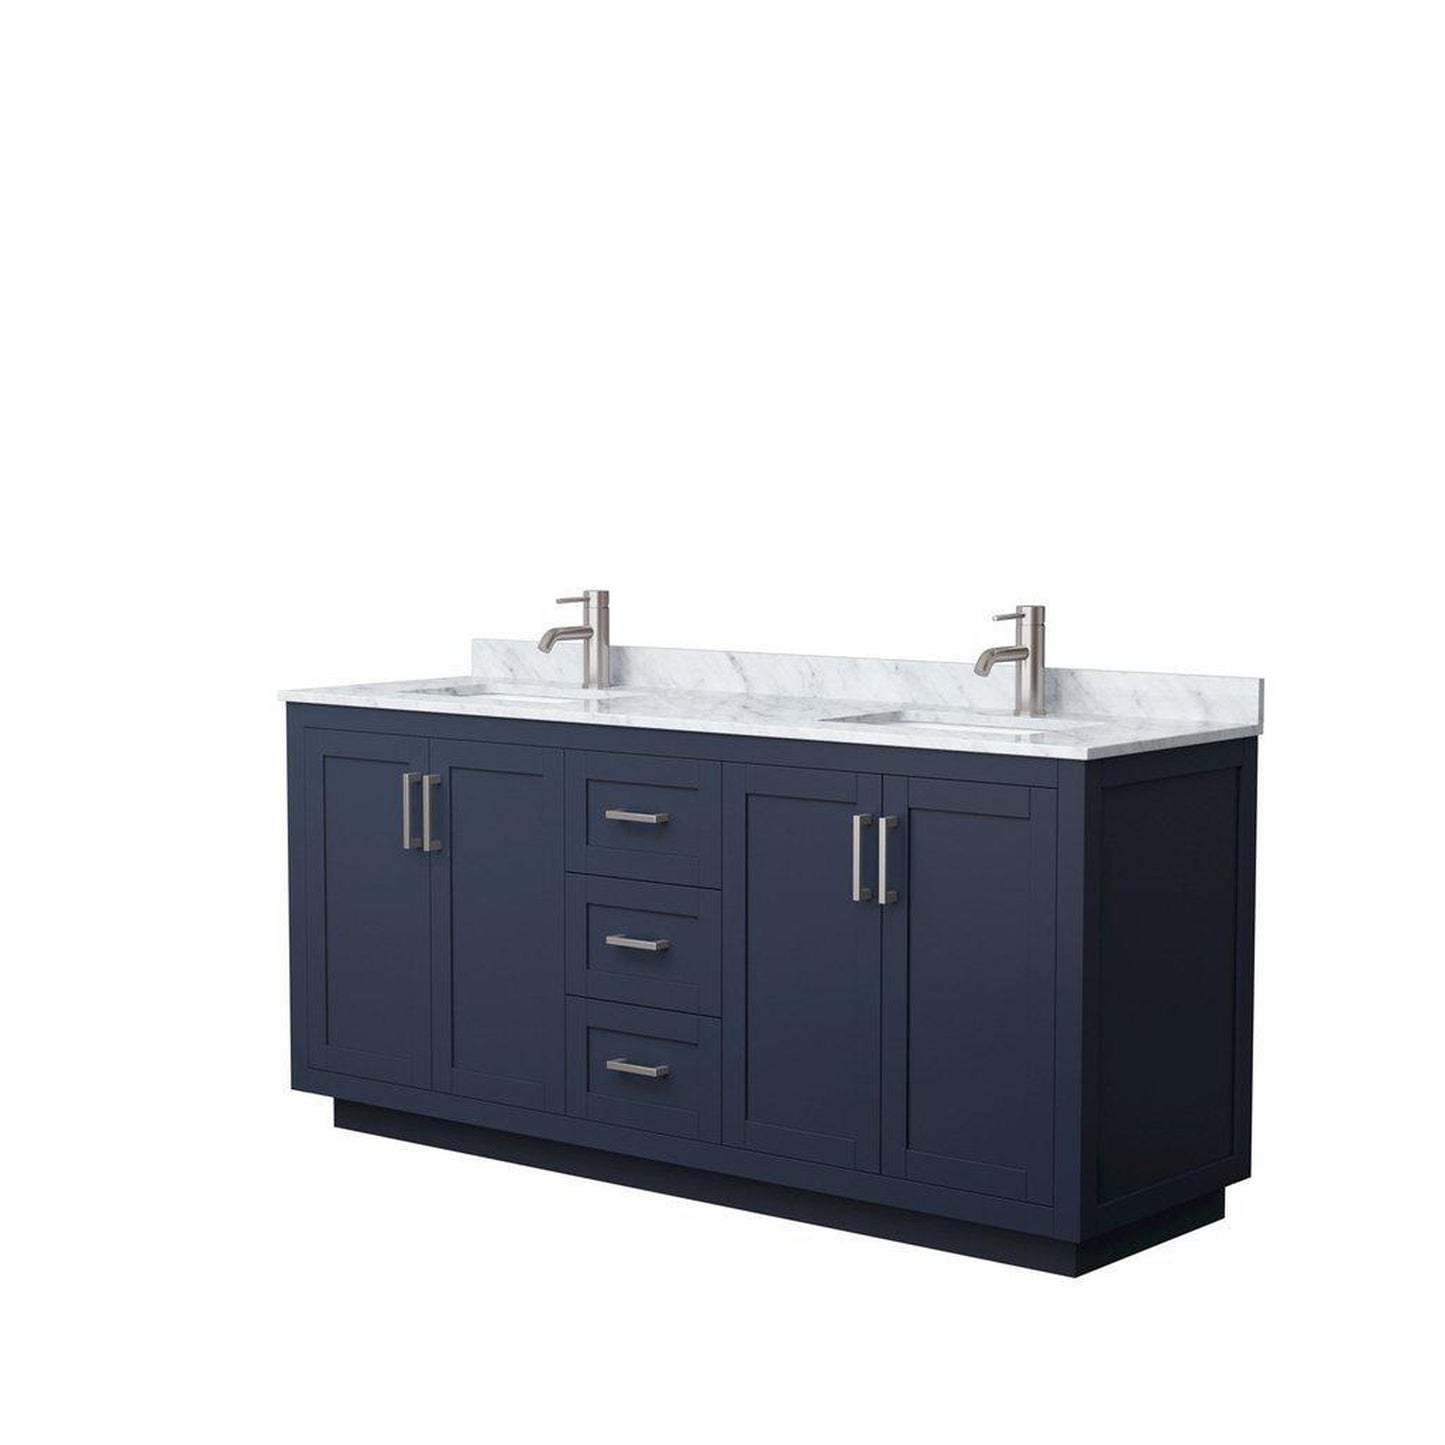 Wyndham Collection Miranda 72" Double Bathroom Dark Blue Vanity Set With White Carrara Marble Countertop, Undermount Square Sink, And Brushed Nickel Trim